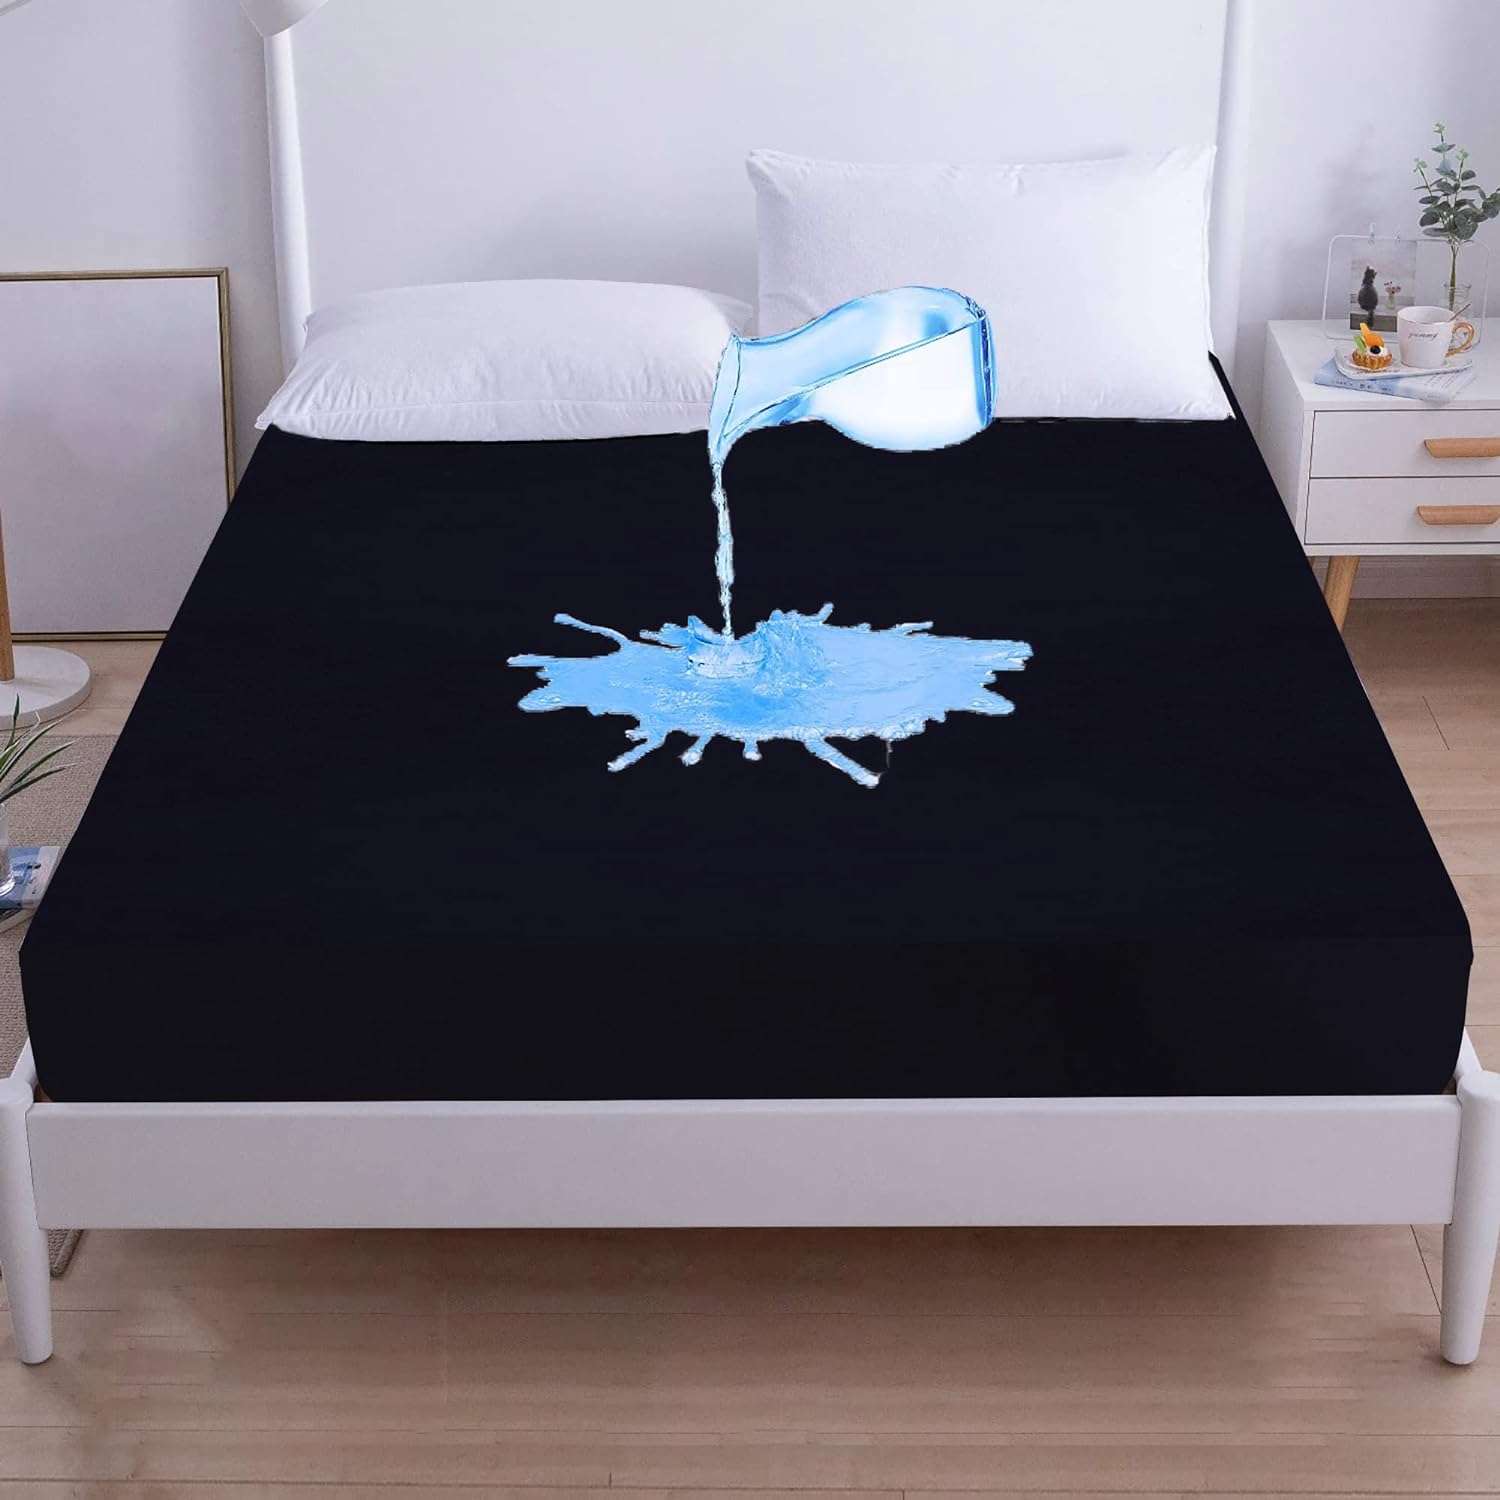 100% water resistant bed protector